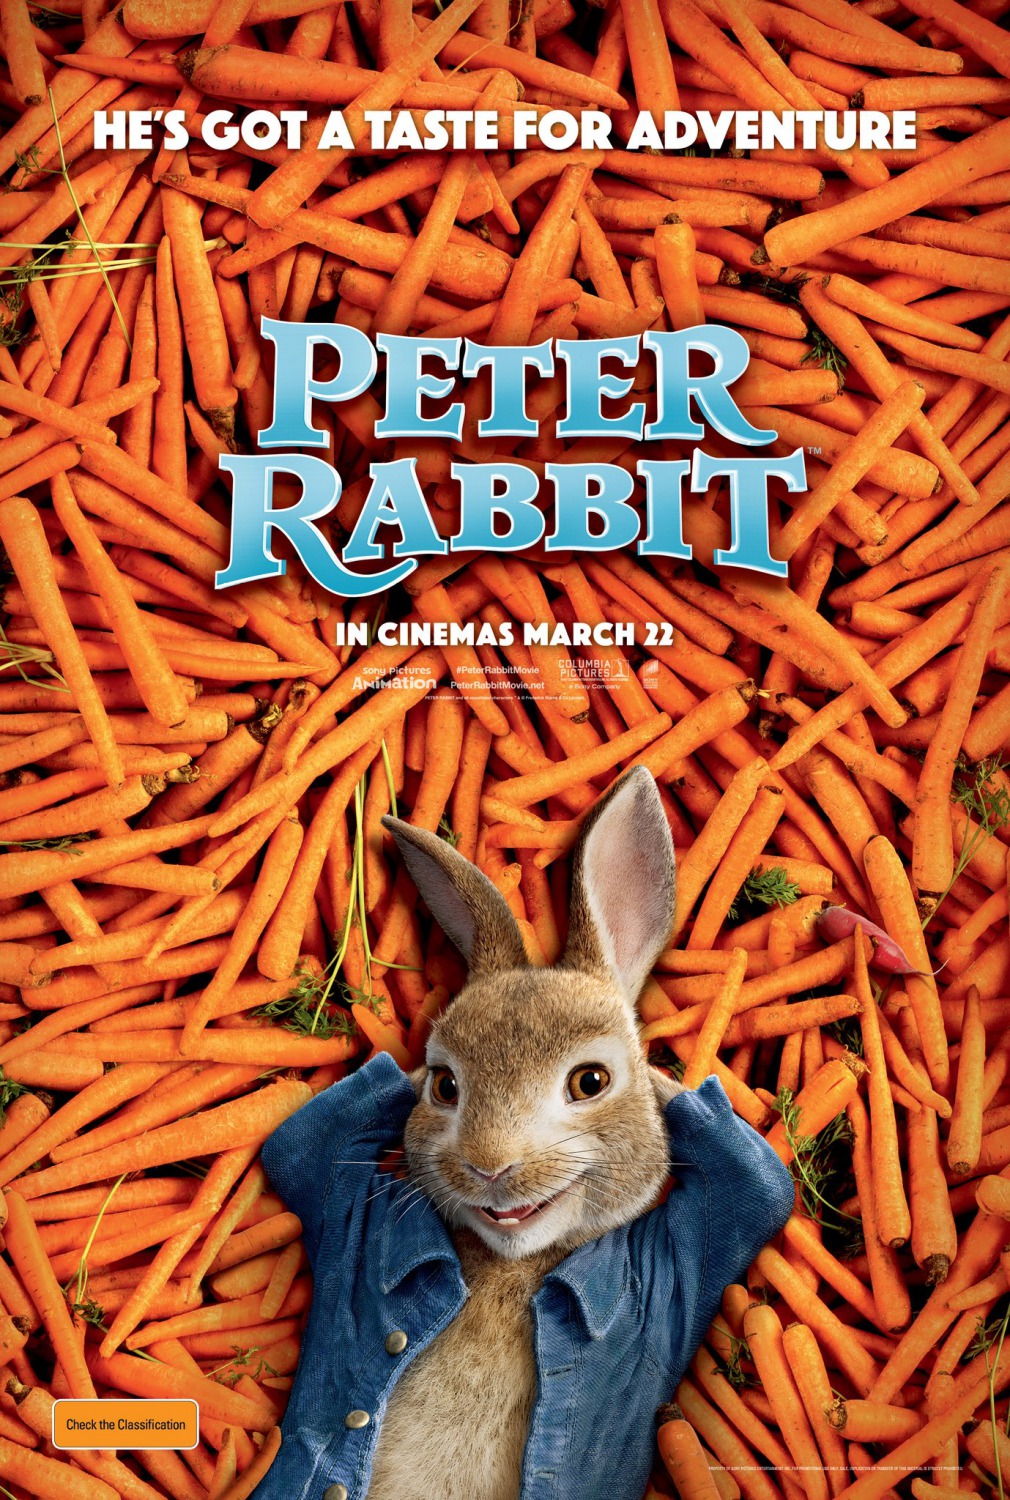 Peter Rabbit – A New Take on a Classic Story!